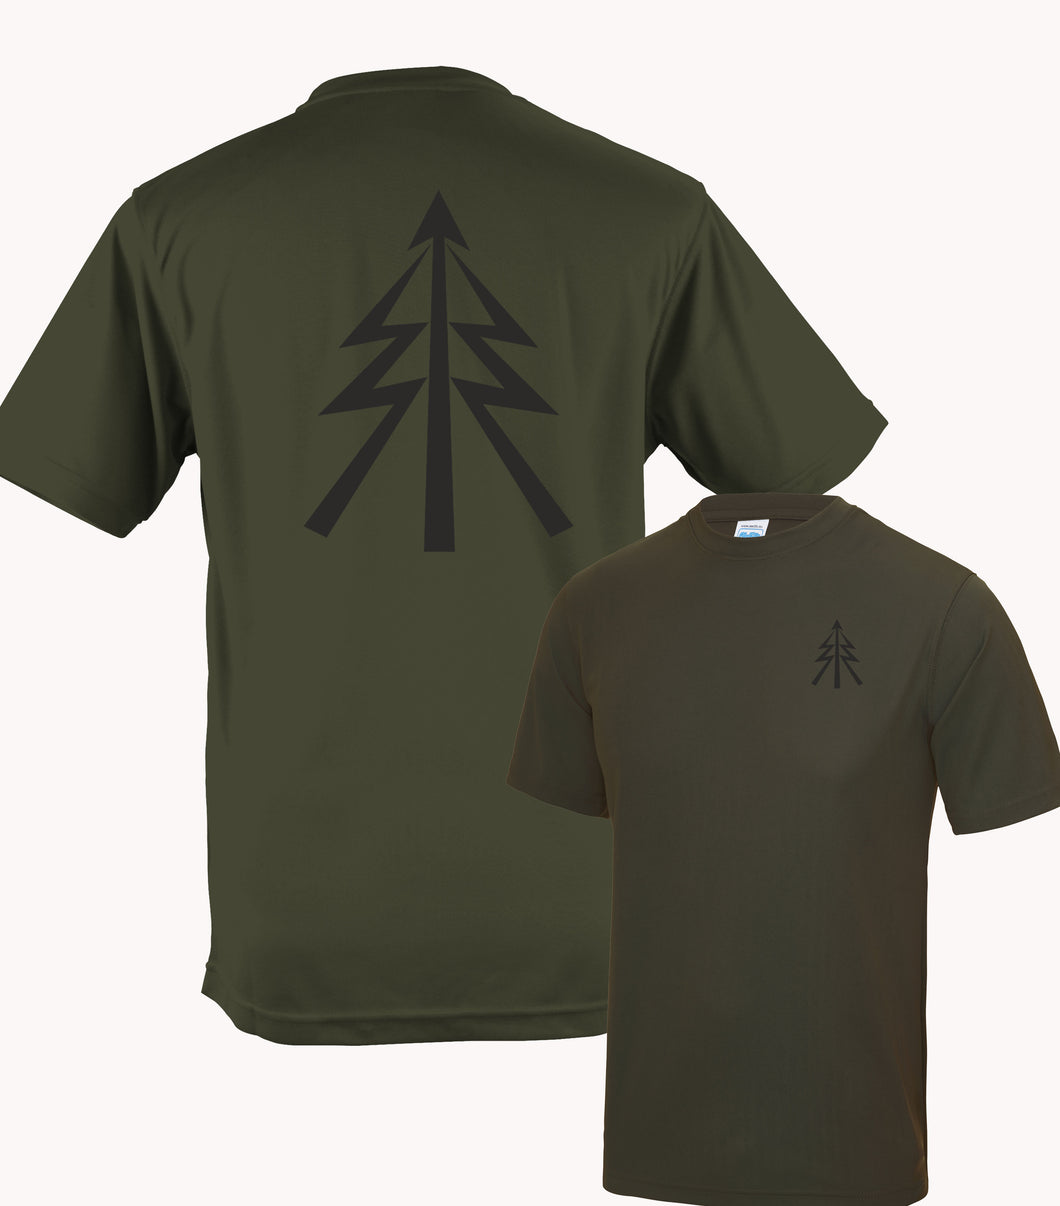 Reconnaissance (Recce) Tree - Fully Printed Wicking Fabric T-shirt